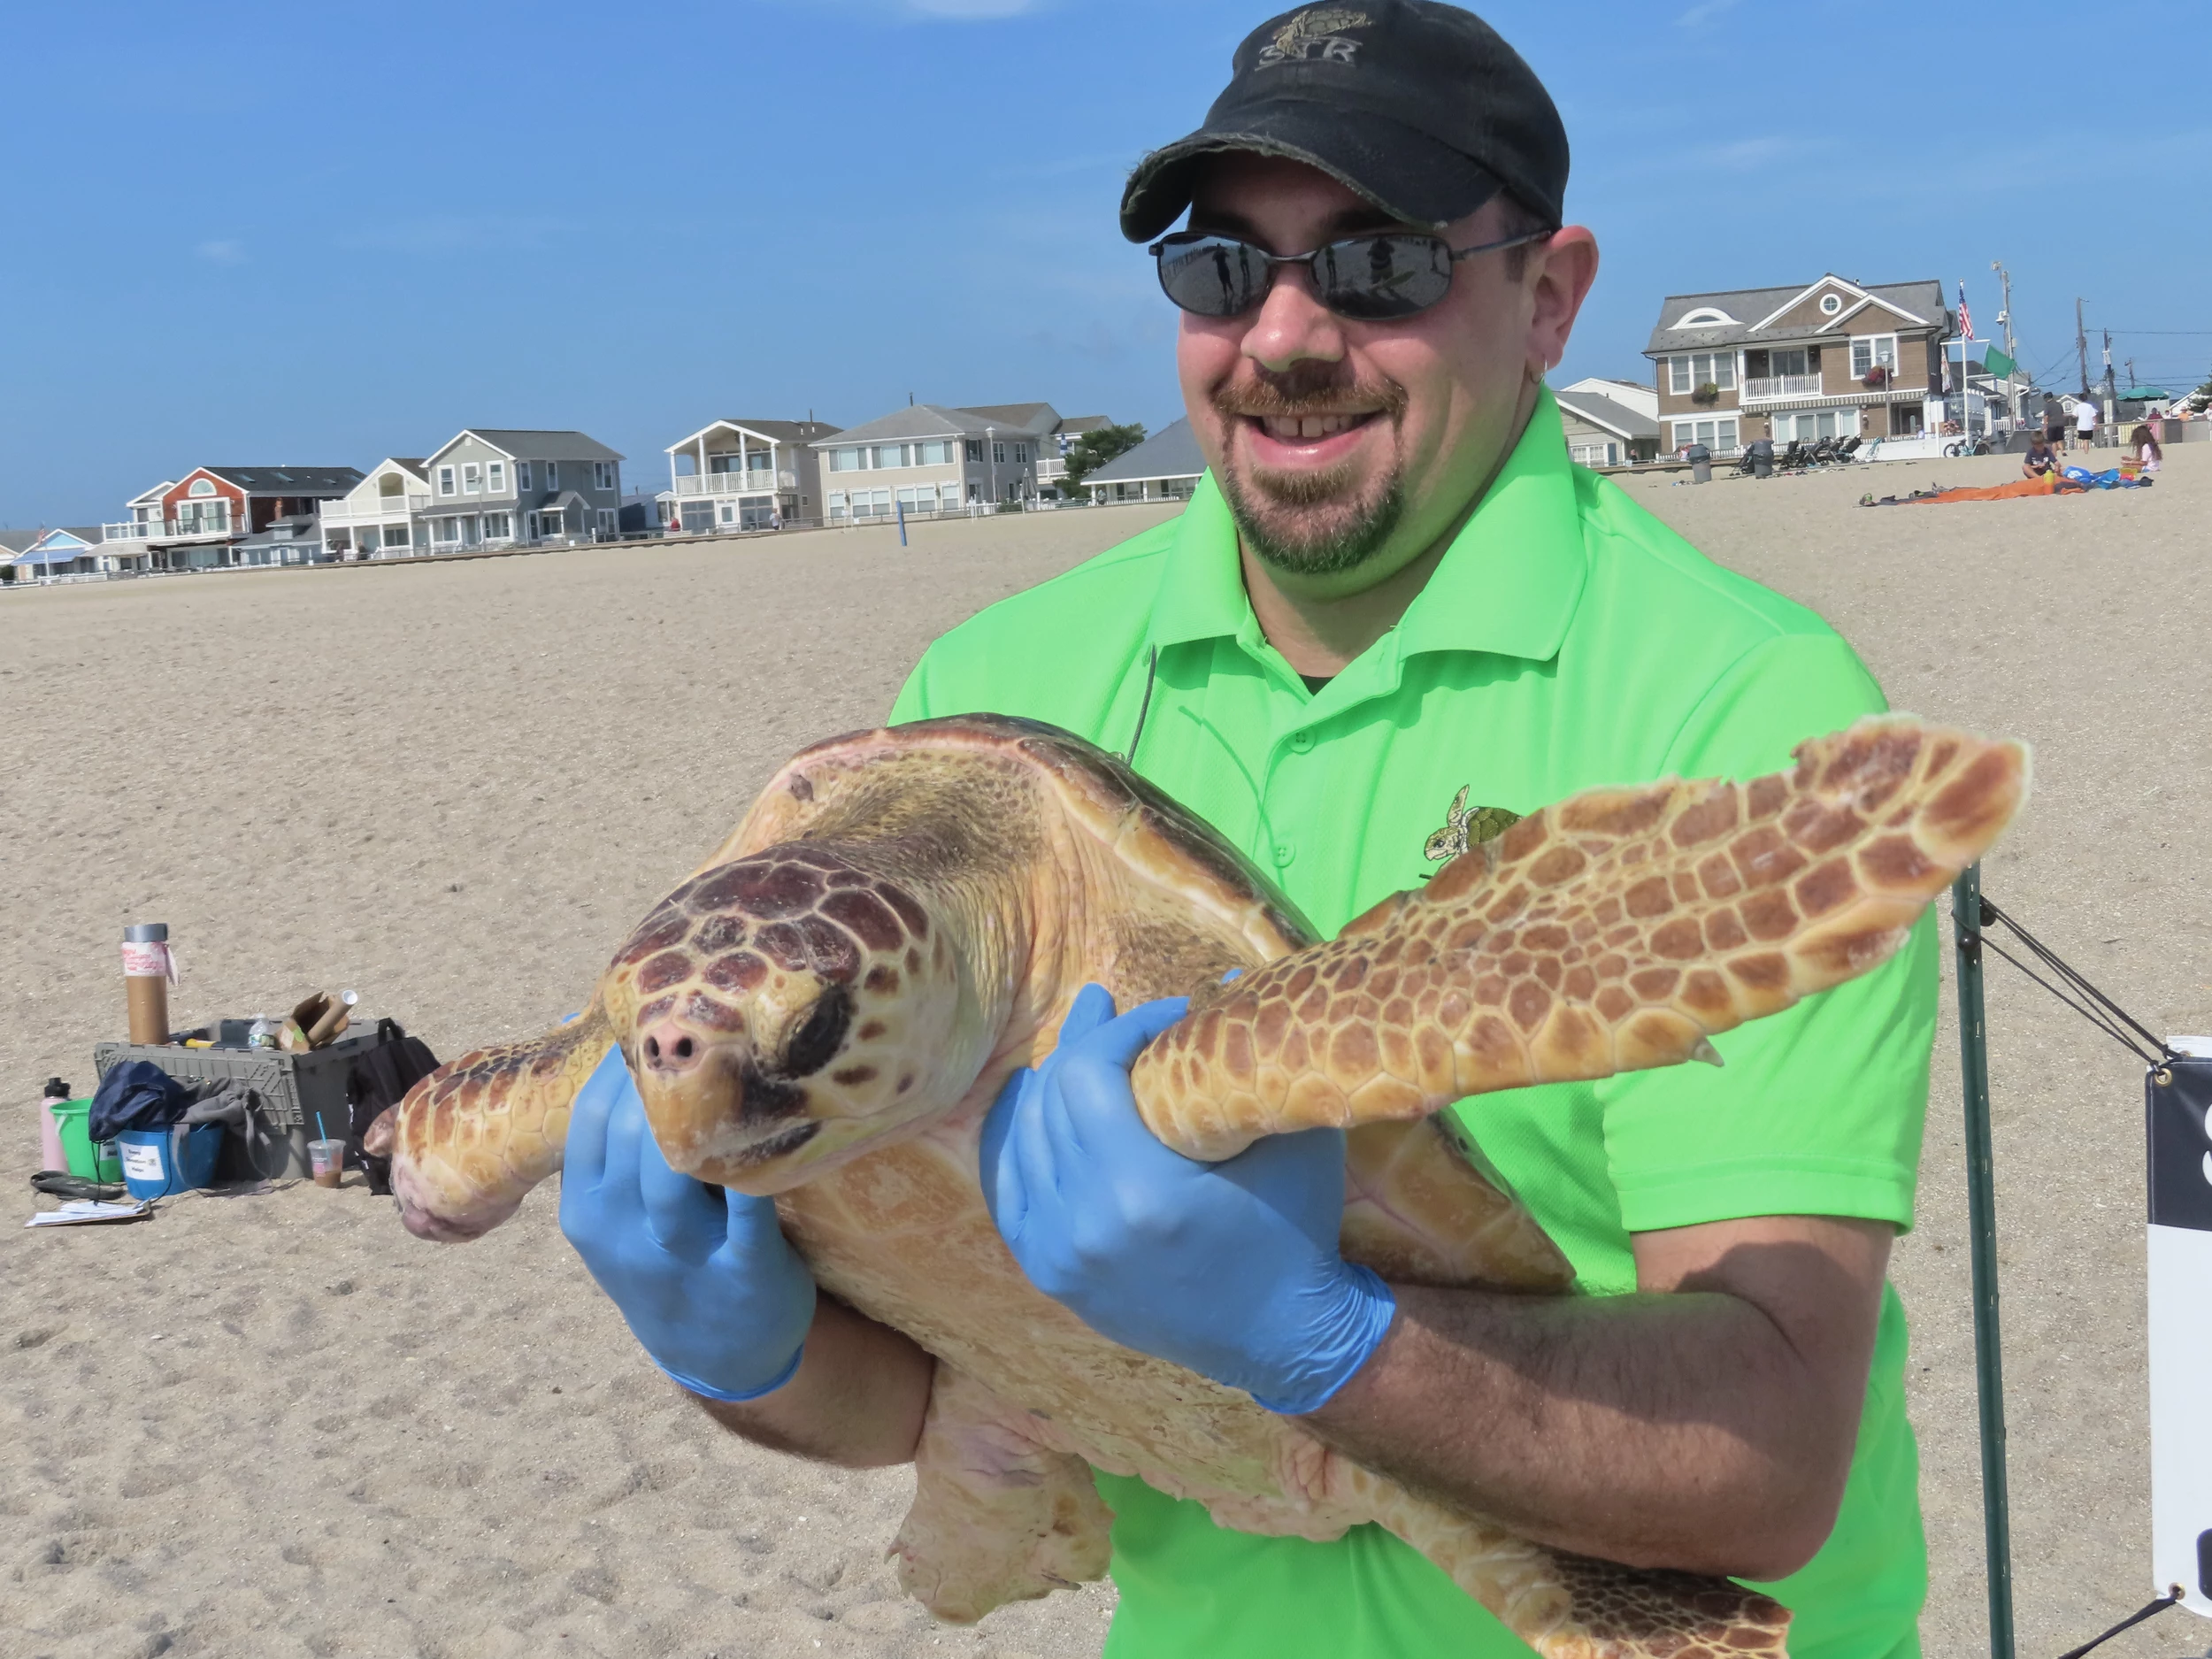 World's toughest turtle? Survivor among 8 returned to ocean at Jersey
Shore